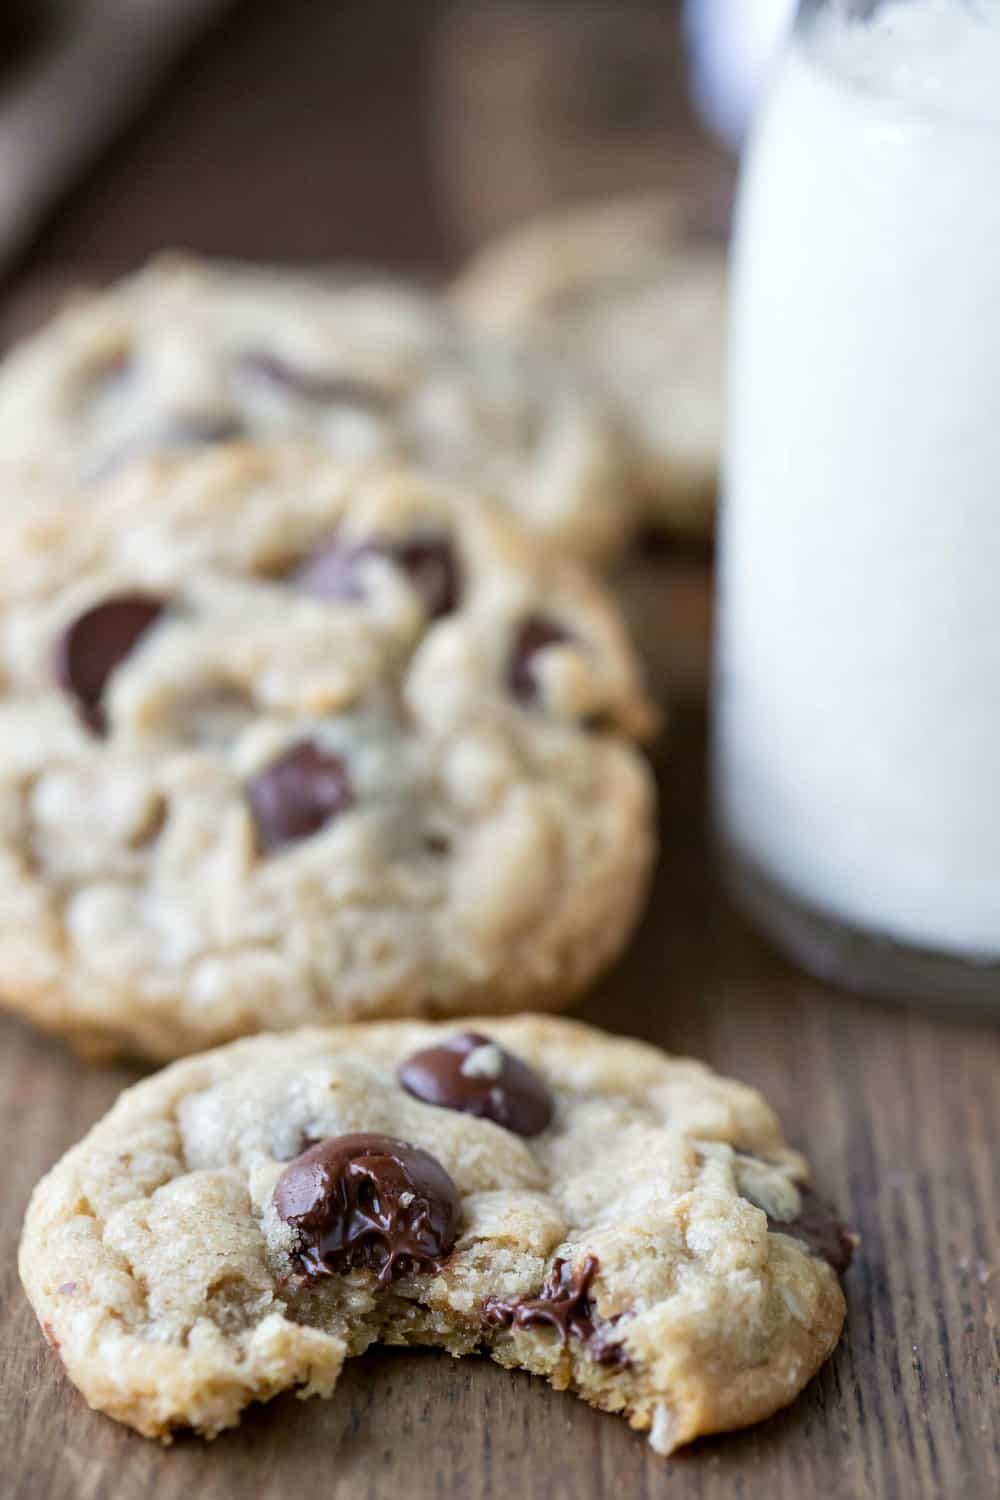 Coconut Oil Oatmeal Chocolate Chip Cookies I Heart Eating